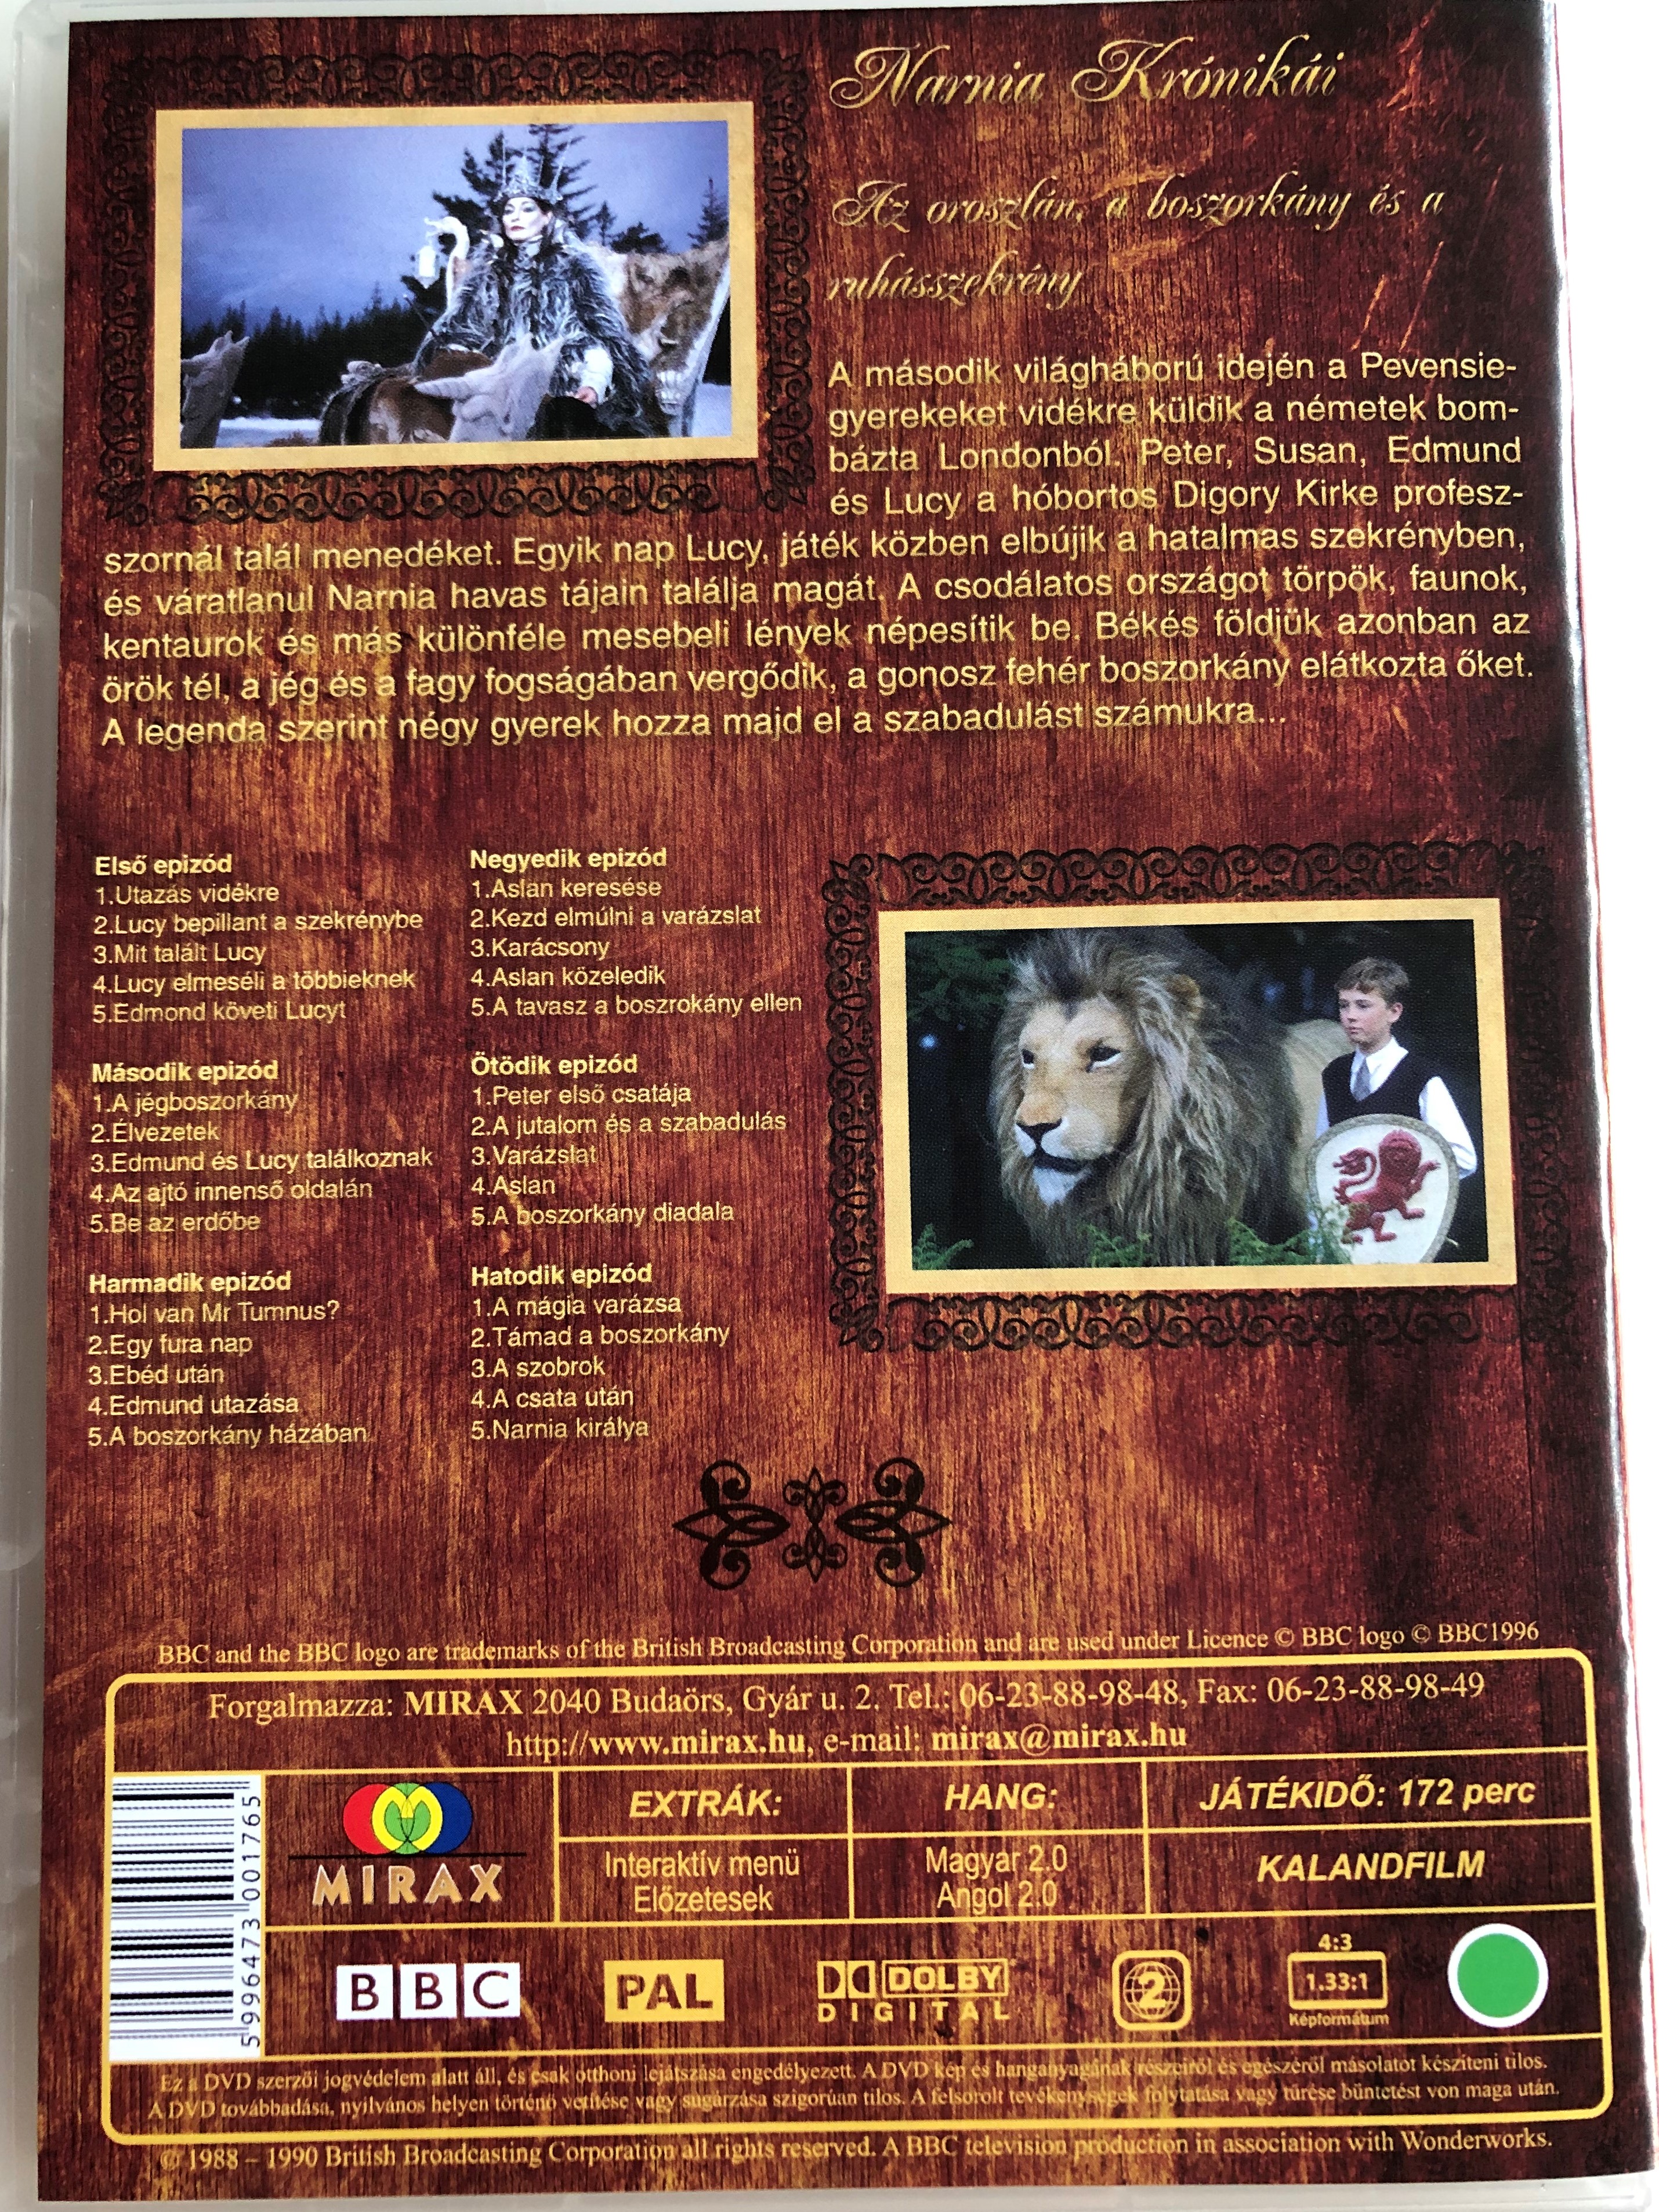 the-chronicles-of-narnia-the-lion-the-witch-and-the-wardrobe-dvd-1988-narnia-kr-nik-i-az-oroszl-n-a-boszork-ny-s-a-ruh-sszekr-ny-bbc-directed-by-marilyn-fox-2-.jpg